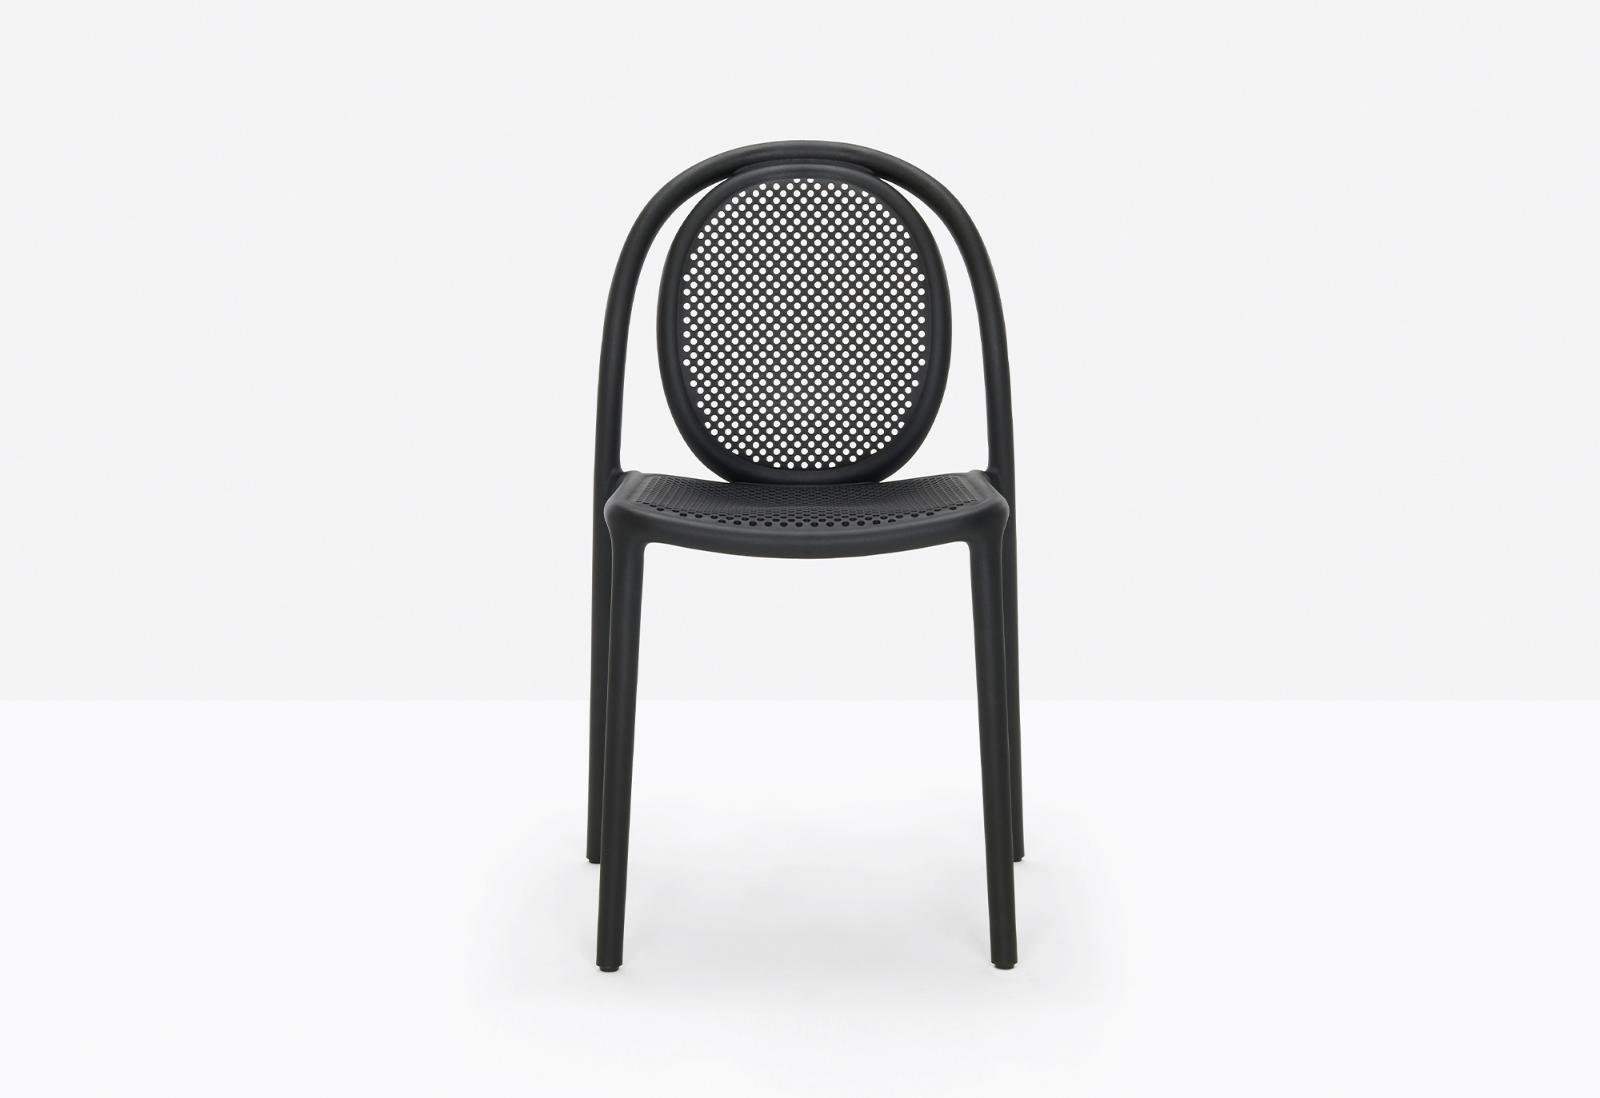 Remind 3730 Chair from Pedrali, designed by Eugeni Quitllet